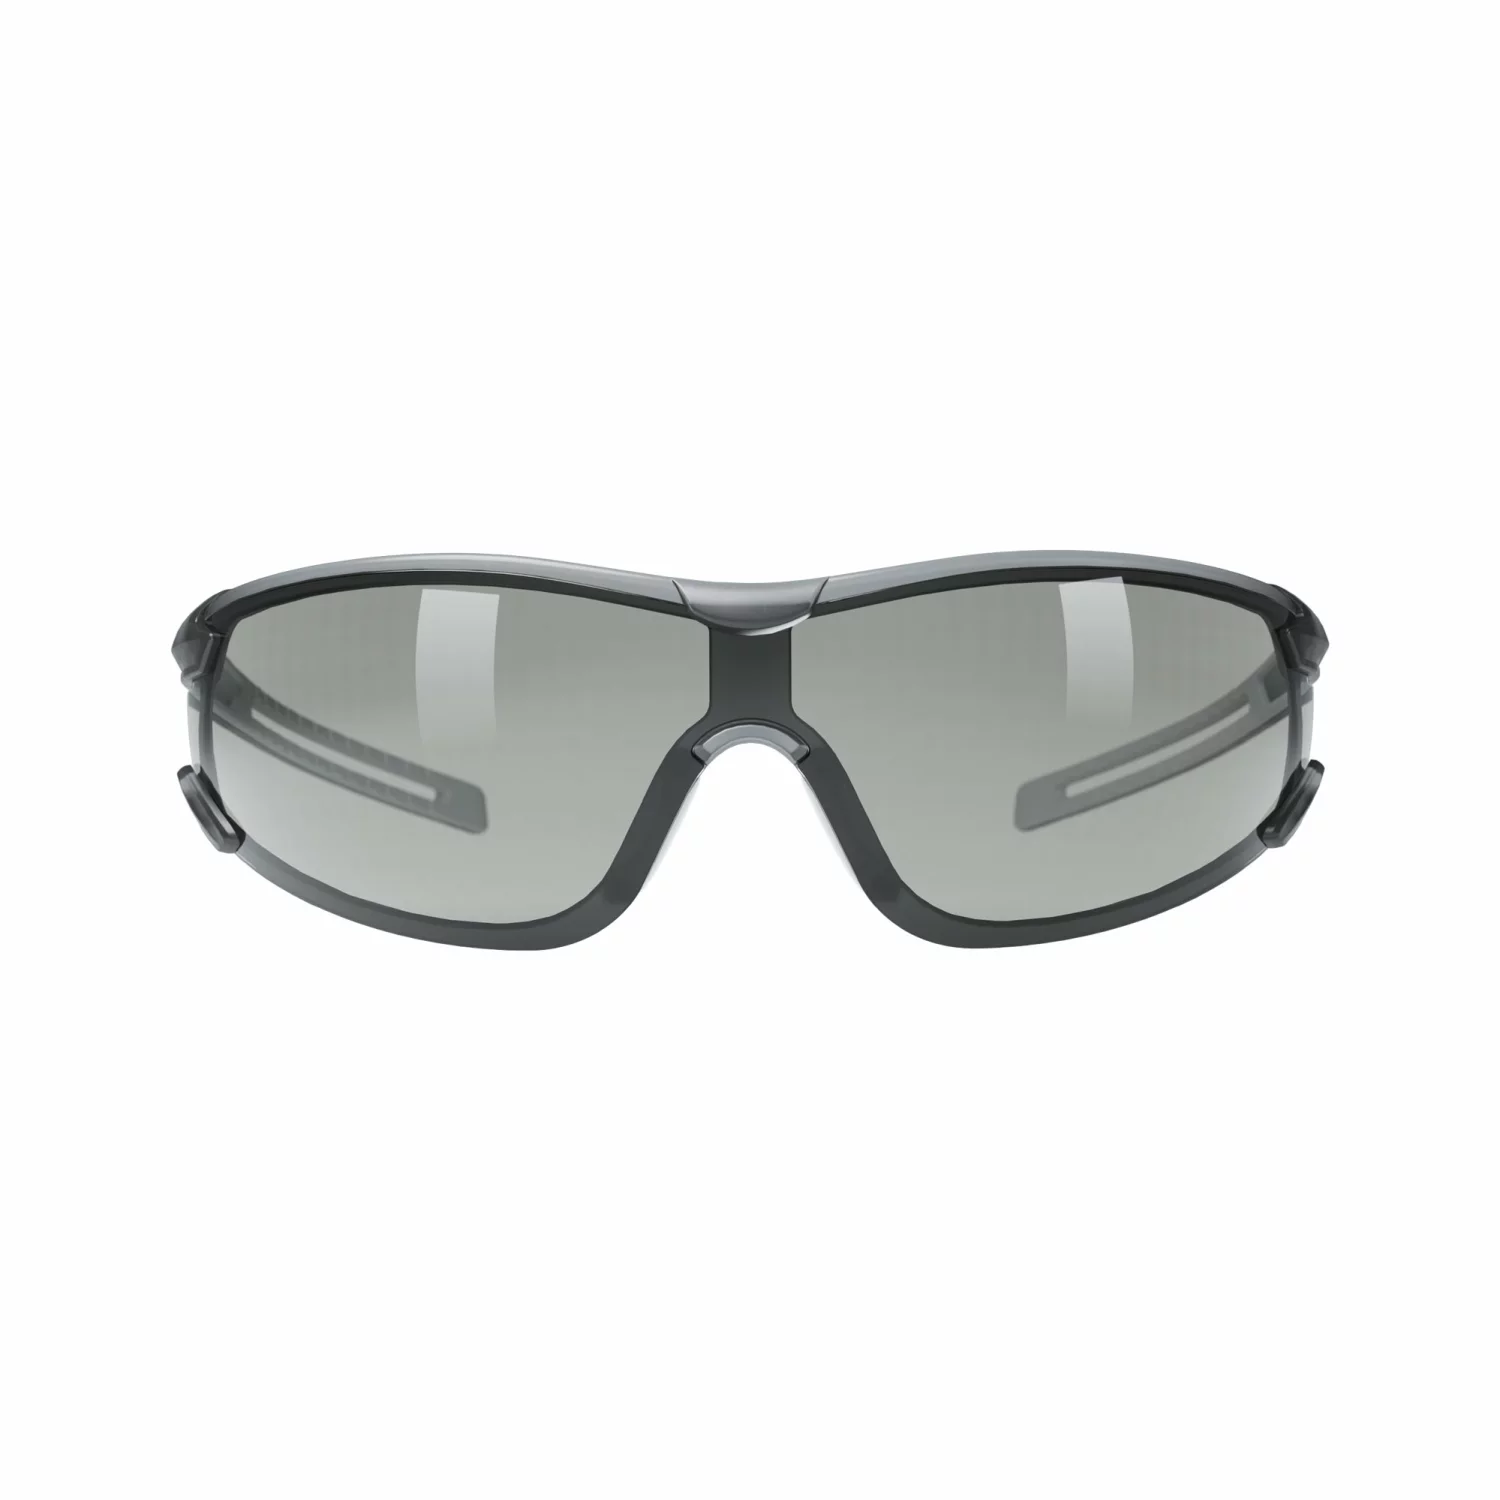 Hellberg Safety 21431-001 Lunettes de protection-image